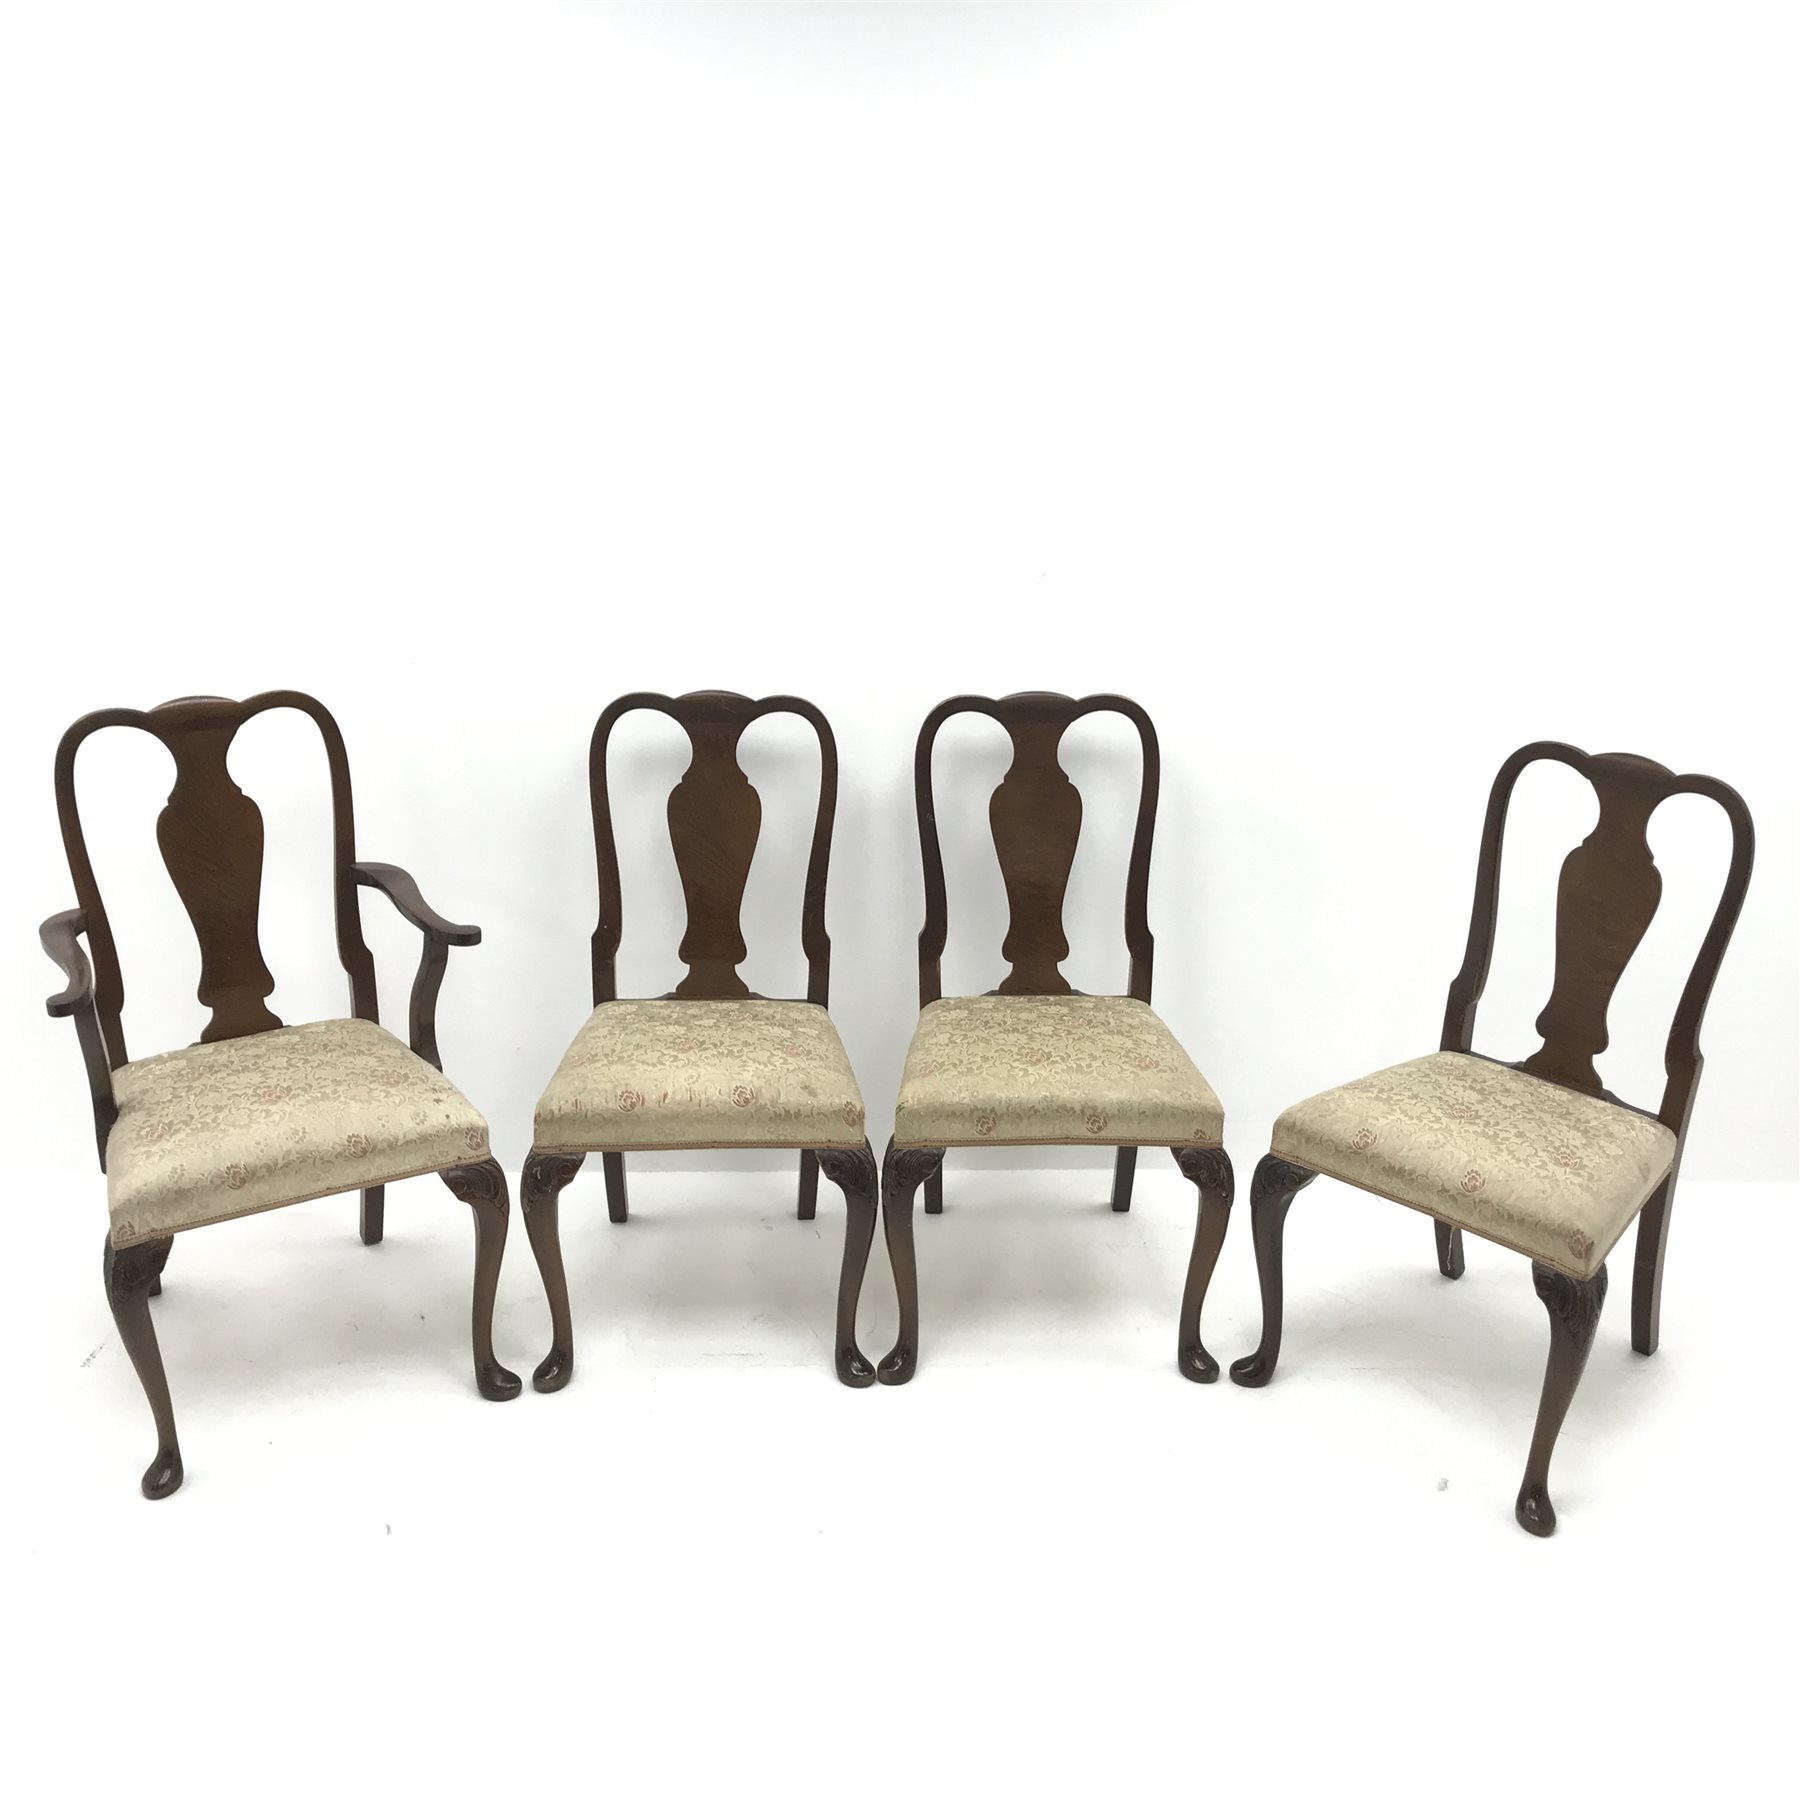 Regency style walnut extending dining table, acanthus carved cabriole